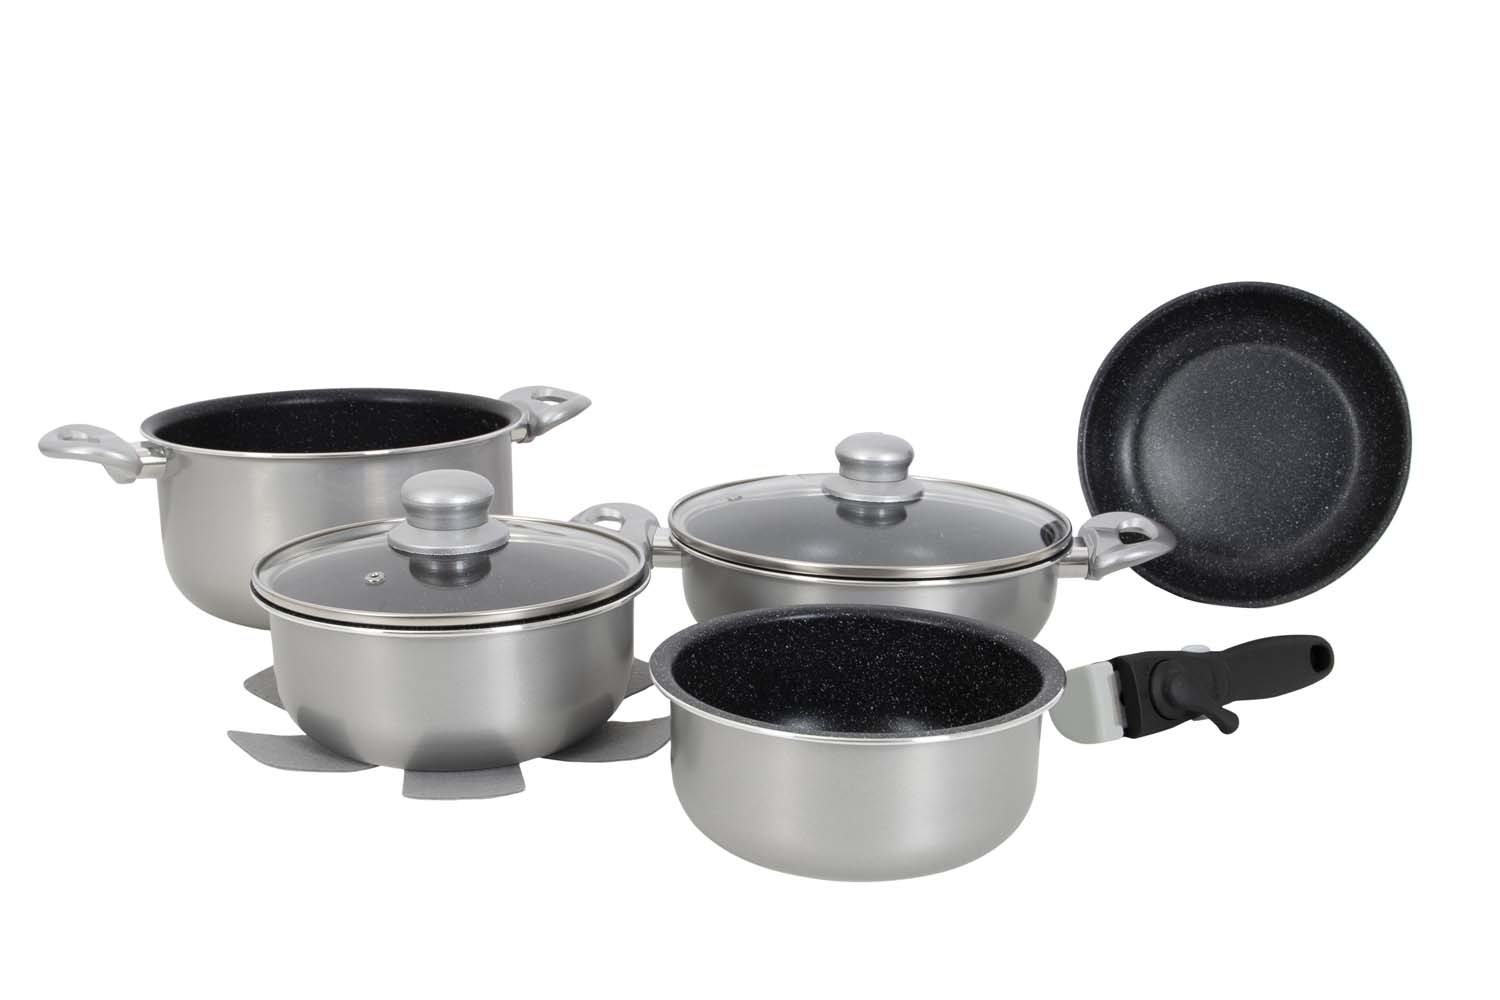 6977227 A 8-piece silver cookware set. Extremely suitable for induction hobs. Ideal for the caravan, camper but also for at home. With sturdy 3-layer non-stick coating. This set consists of: 4 saucepans Ø 24 cm - 4 L, Ø 23,5 cm - 2,2 L, Ø 19,5 cm - 1,7 L, Ø 18 cm, 1,3 L. Pan Ø 21,5 cm. 2x lids Ø 23,5 cm and Ø 19,5 cm. In addition, this set is equipped with a safety handle with locking function. Including 3 pan protectors made from vilt.